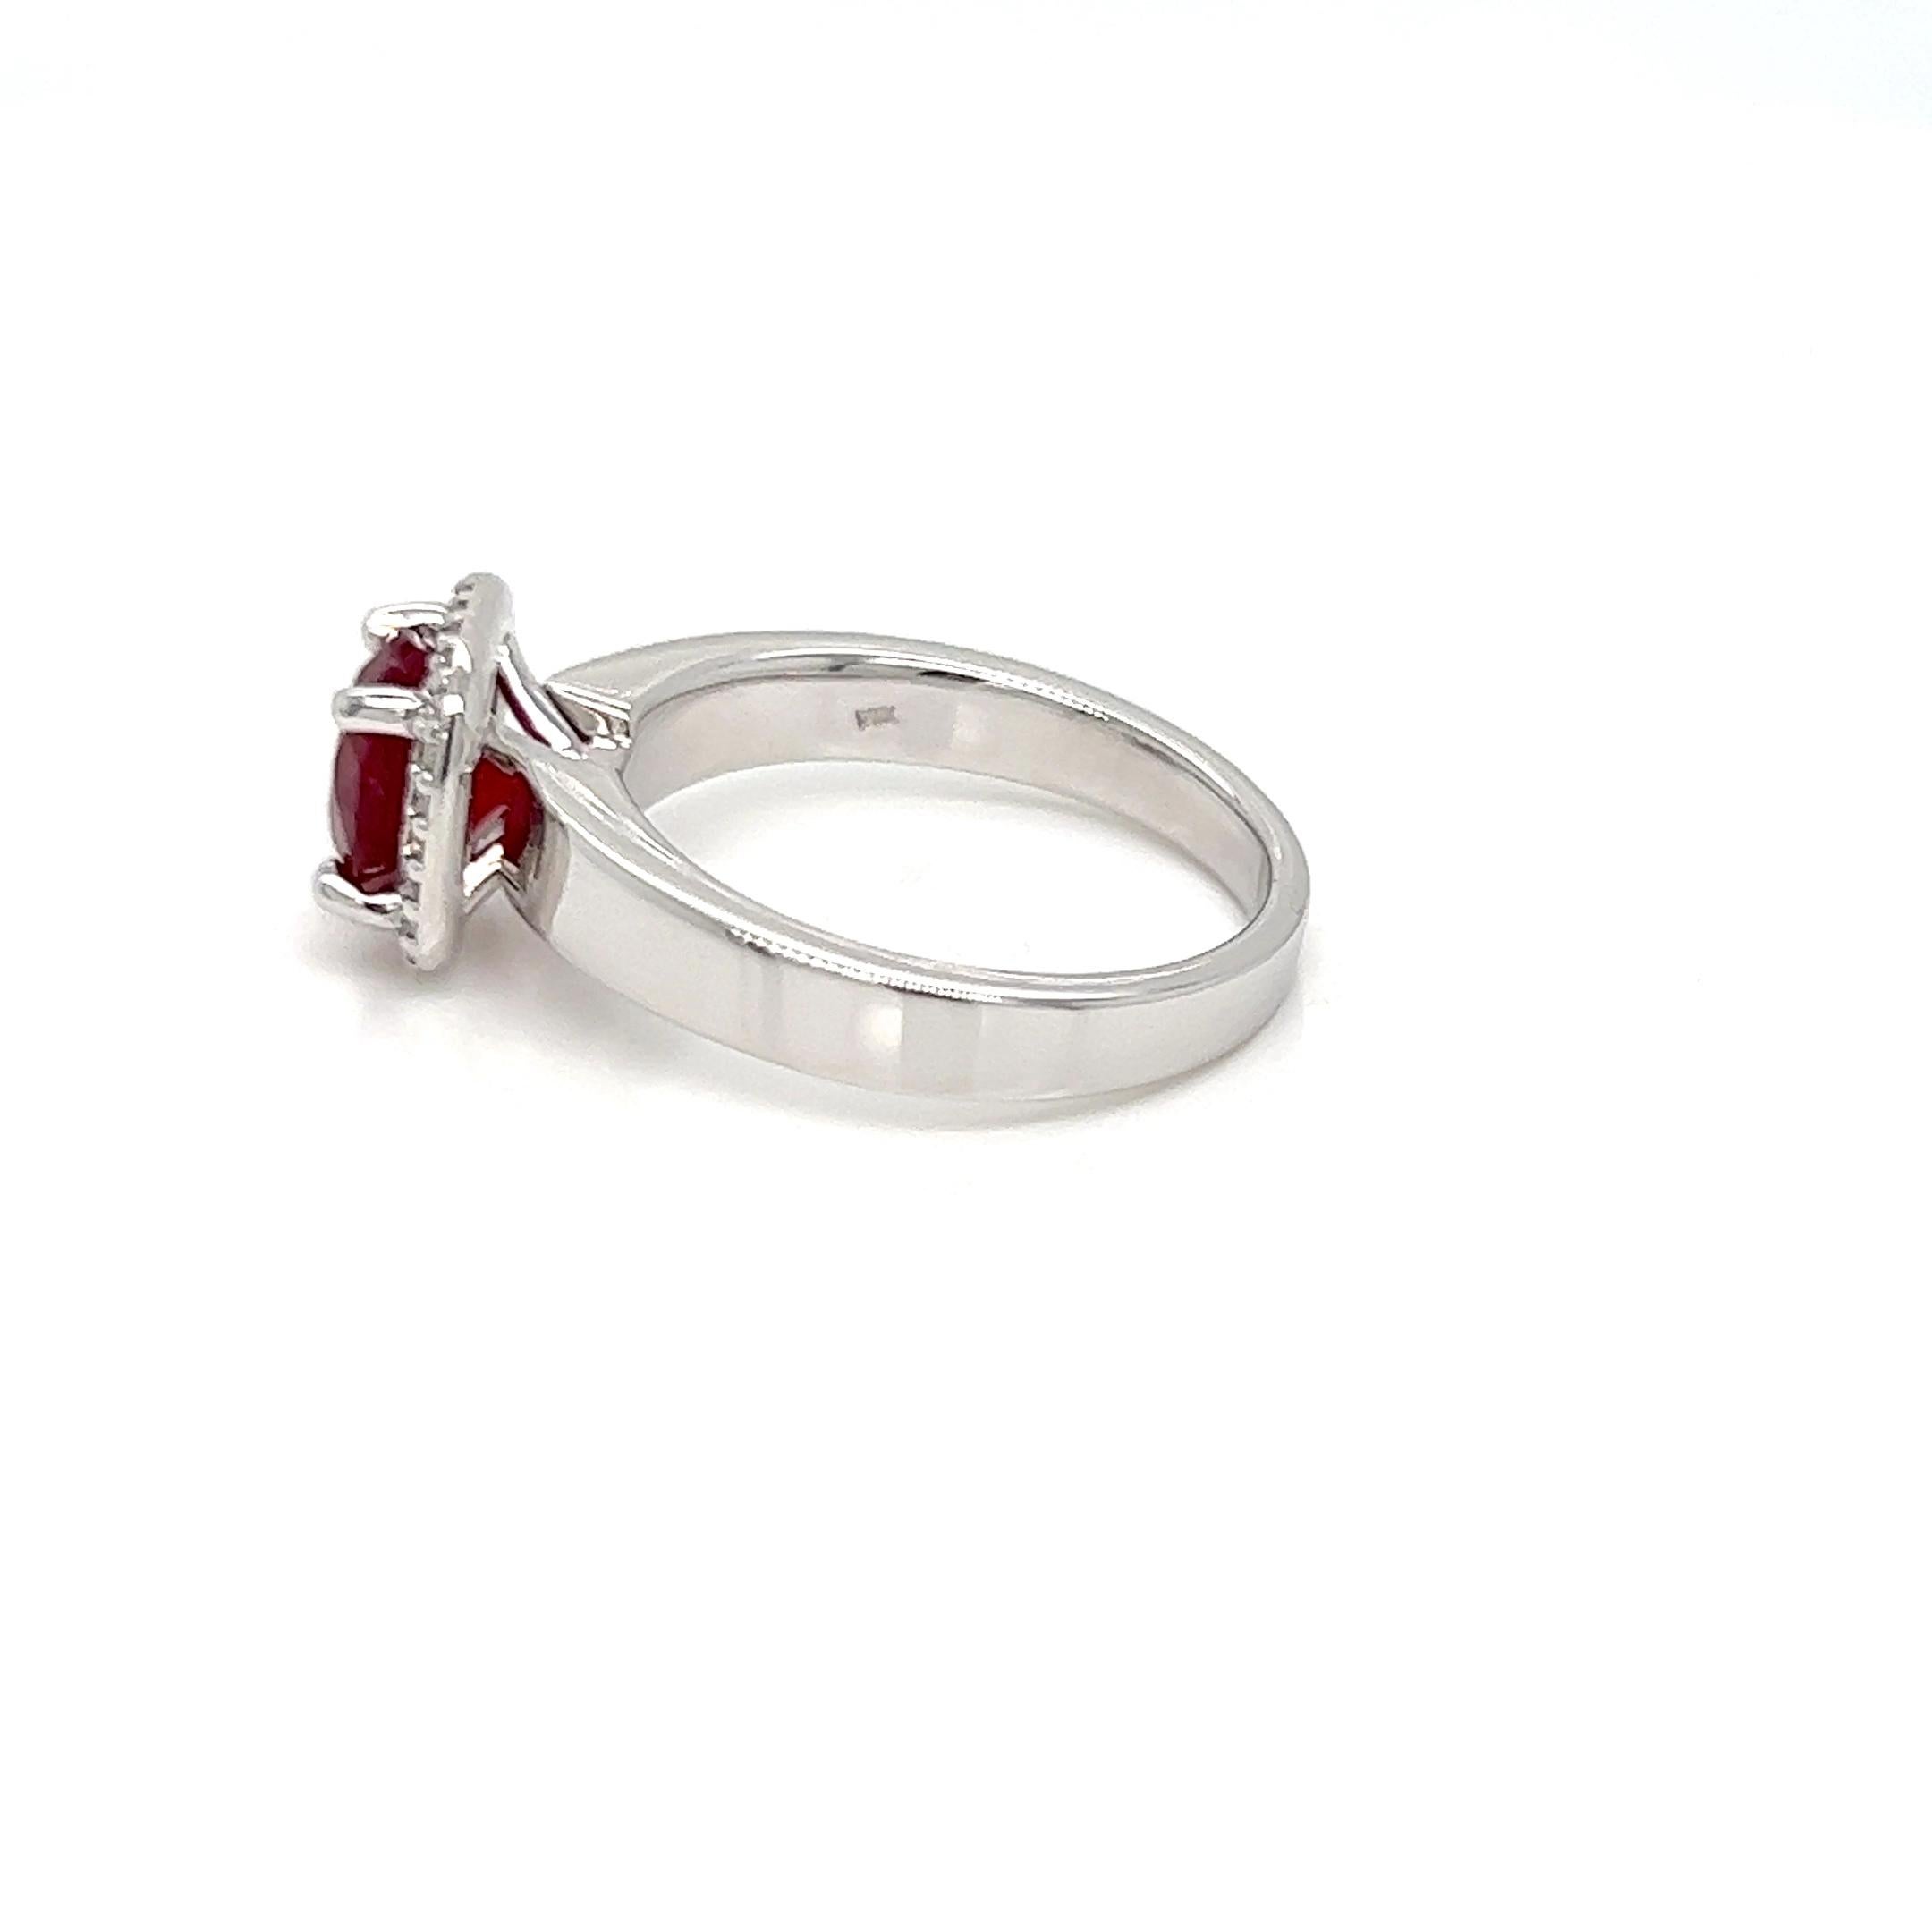 Embark the journey of everlasting love with this ring, it features a 1.93 carats of ruby and diamonds making it a halo ring and the perfect gift for that one person. The ruby is mined from Mozambique known for its beautiful pinkish red tone and the